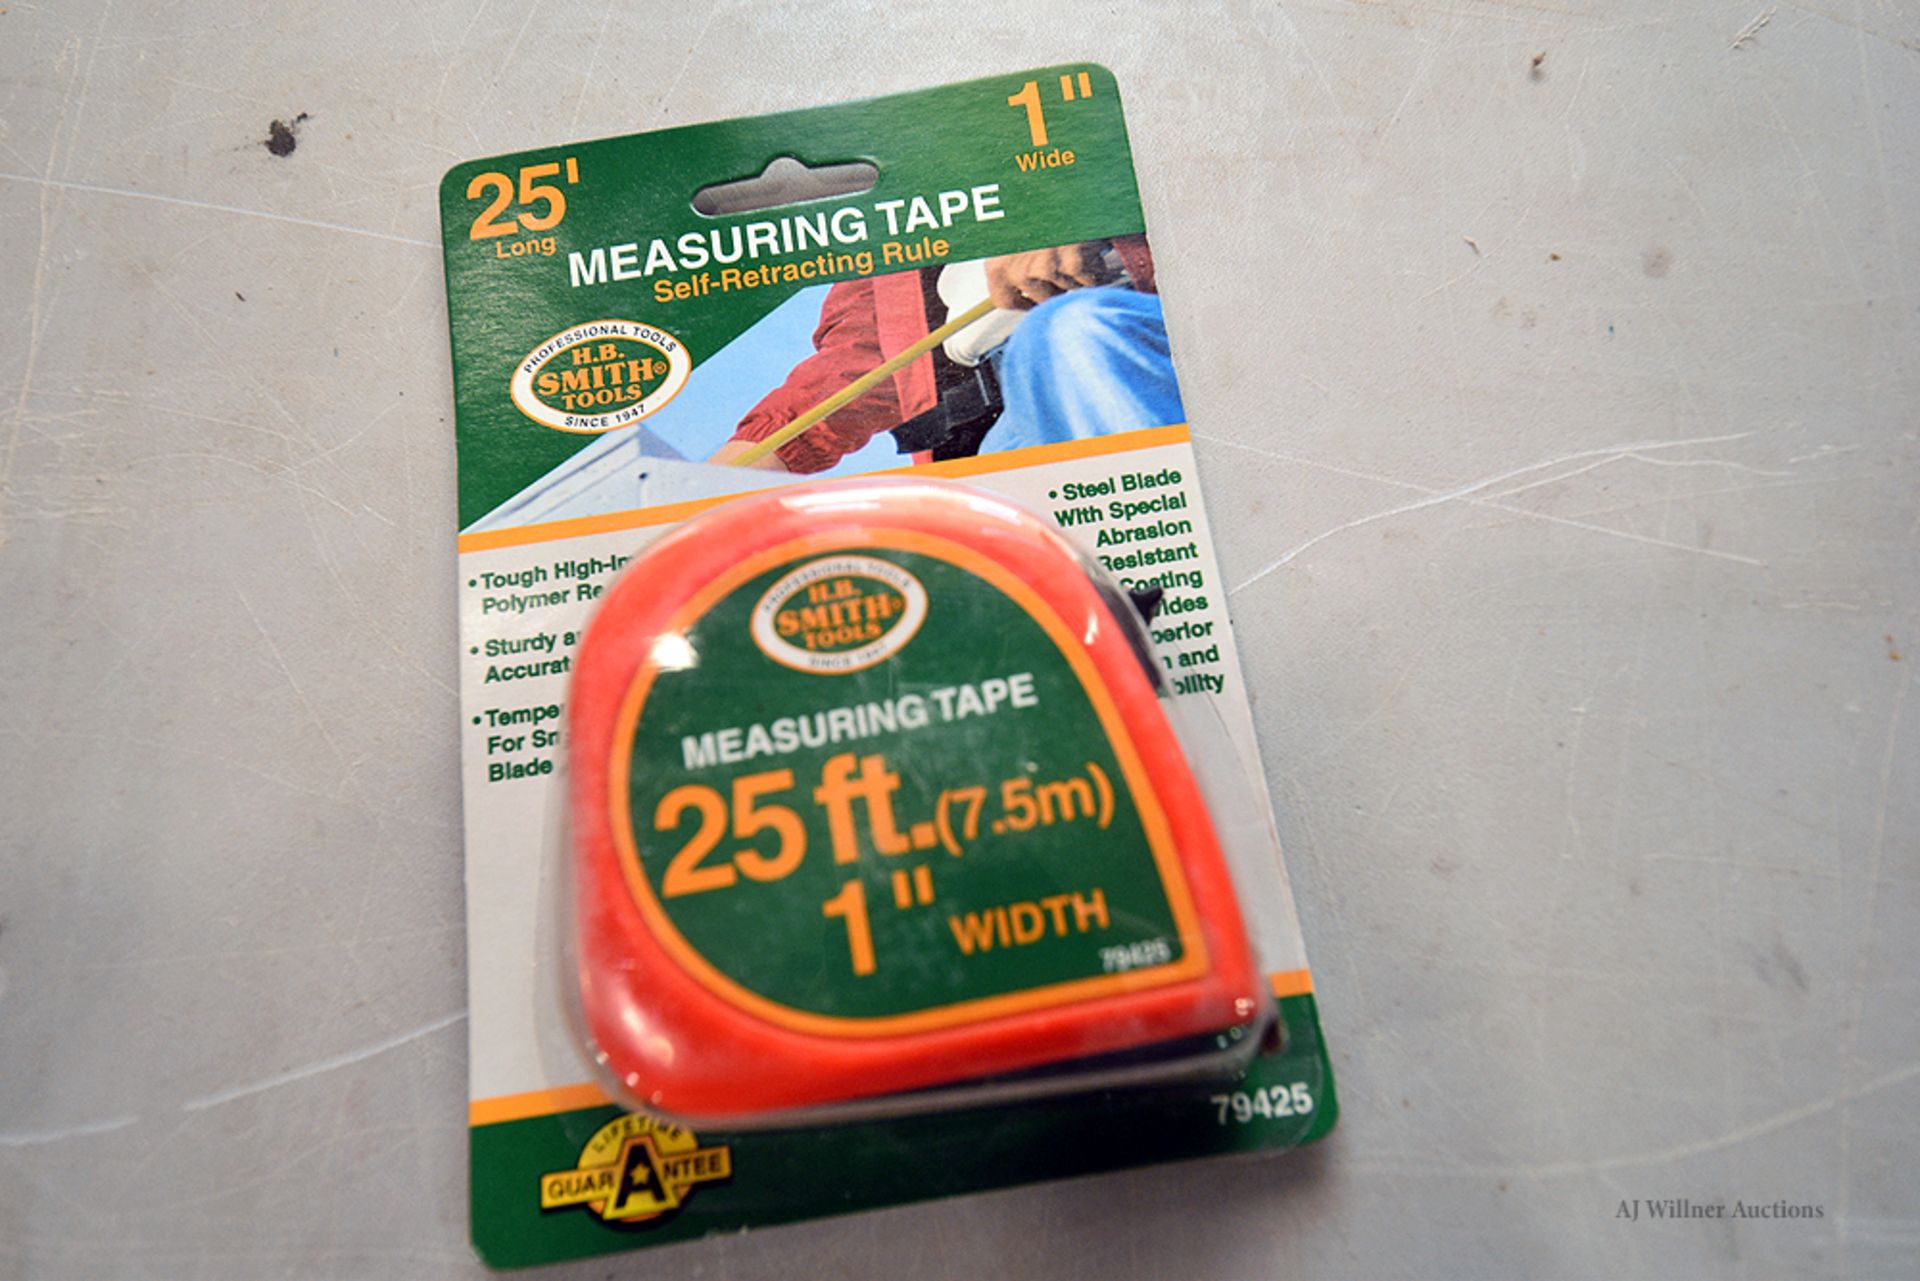 H.B. Smith Tools, 25' Tape Measure